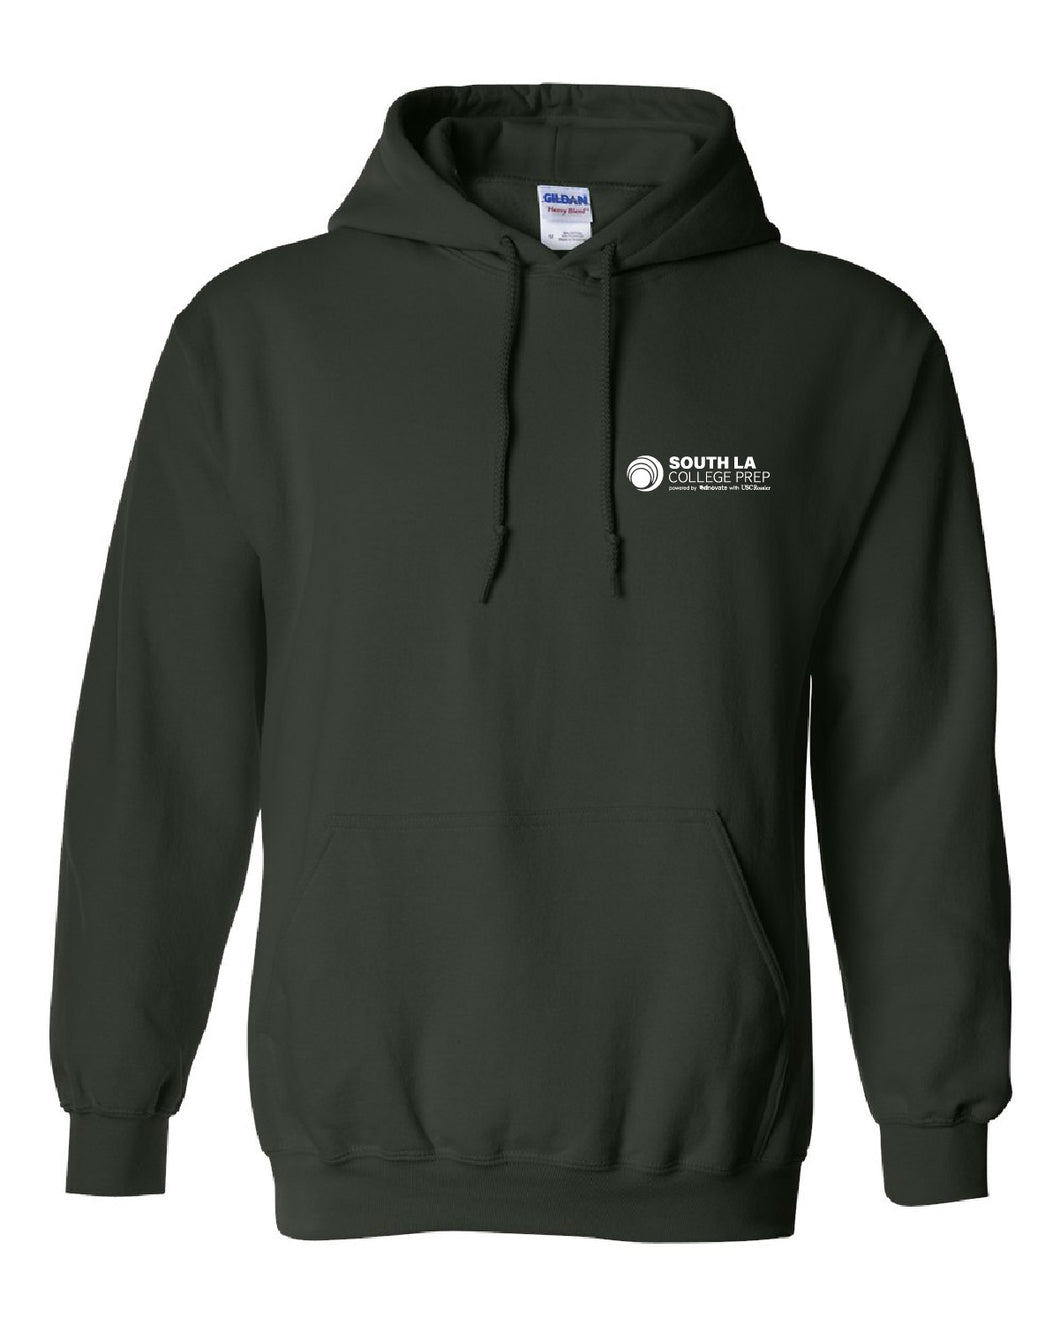 South LA College Prep Hooded Sweater